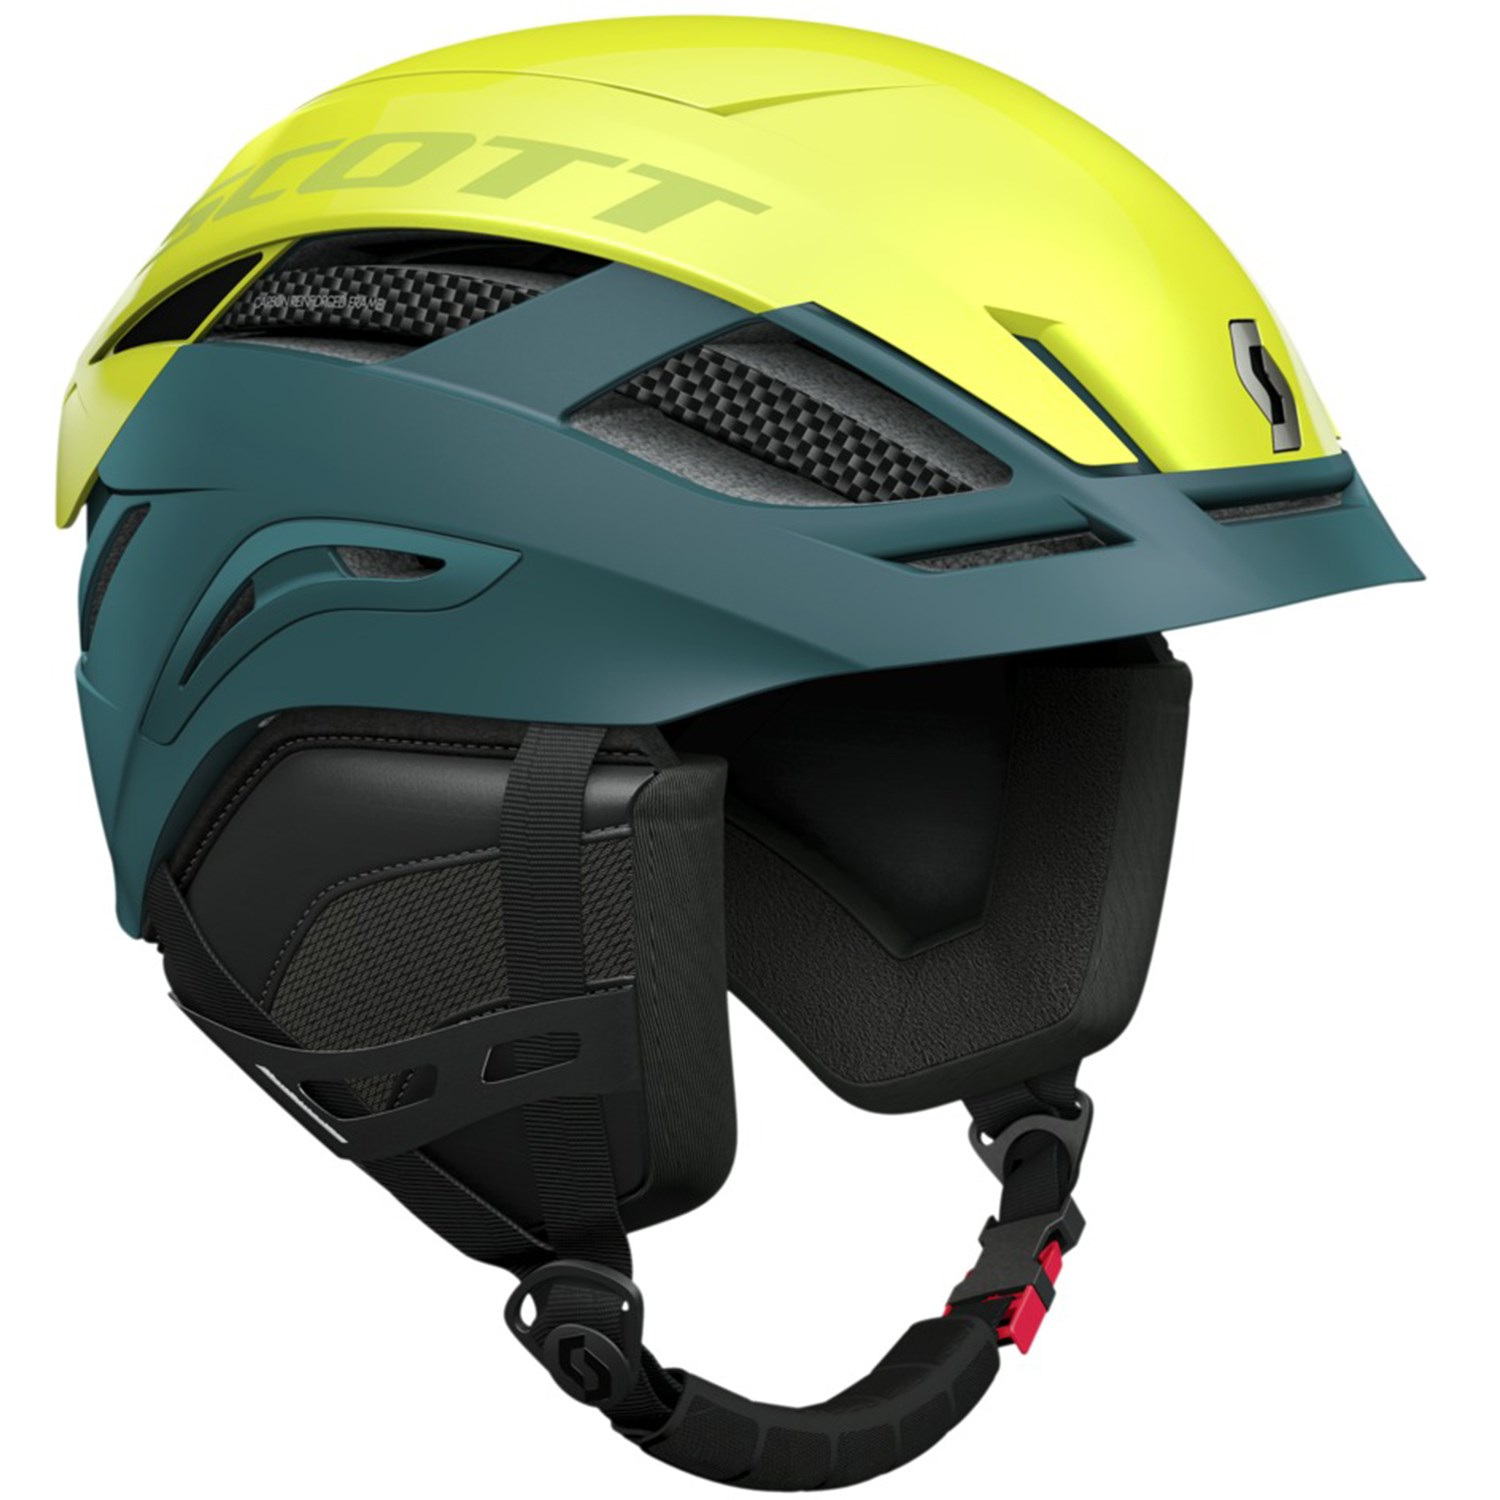 Ski helmet.  If you don't have one, get one:  